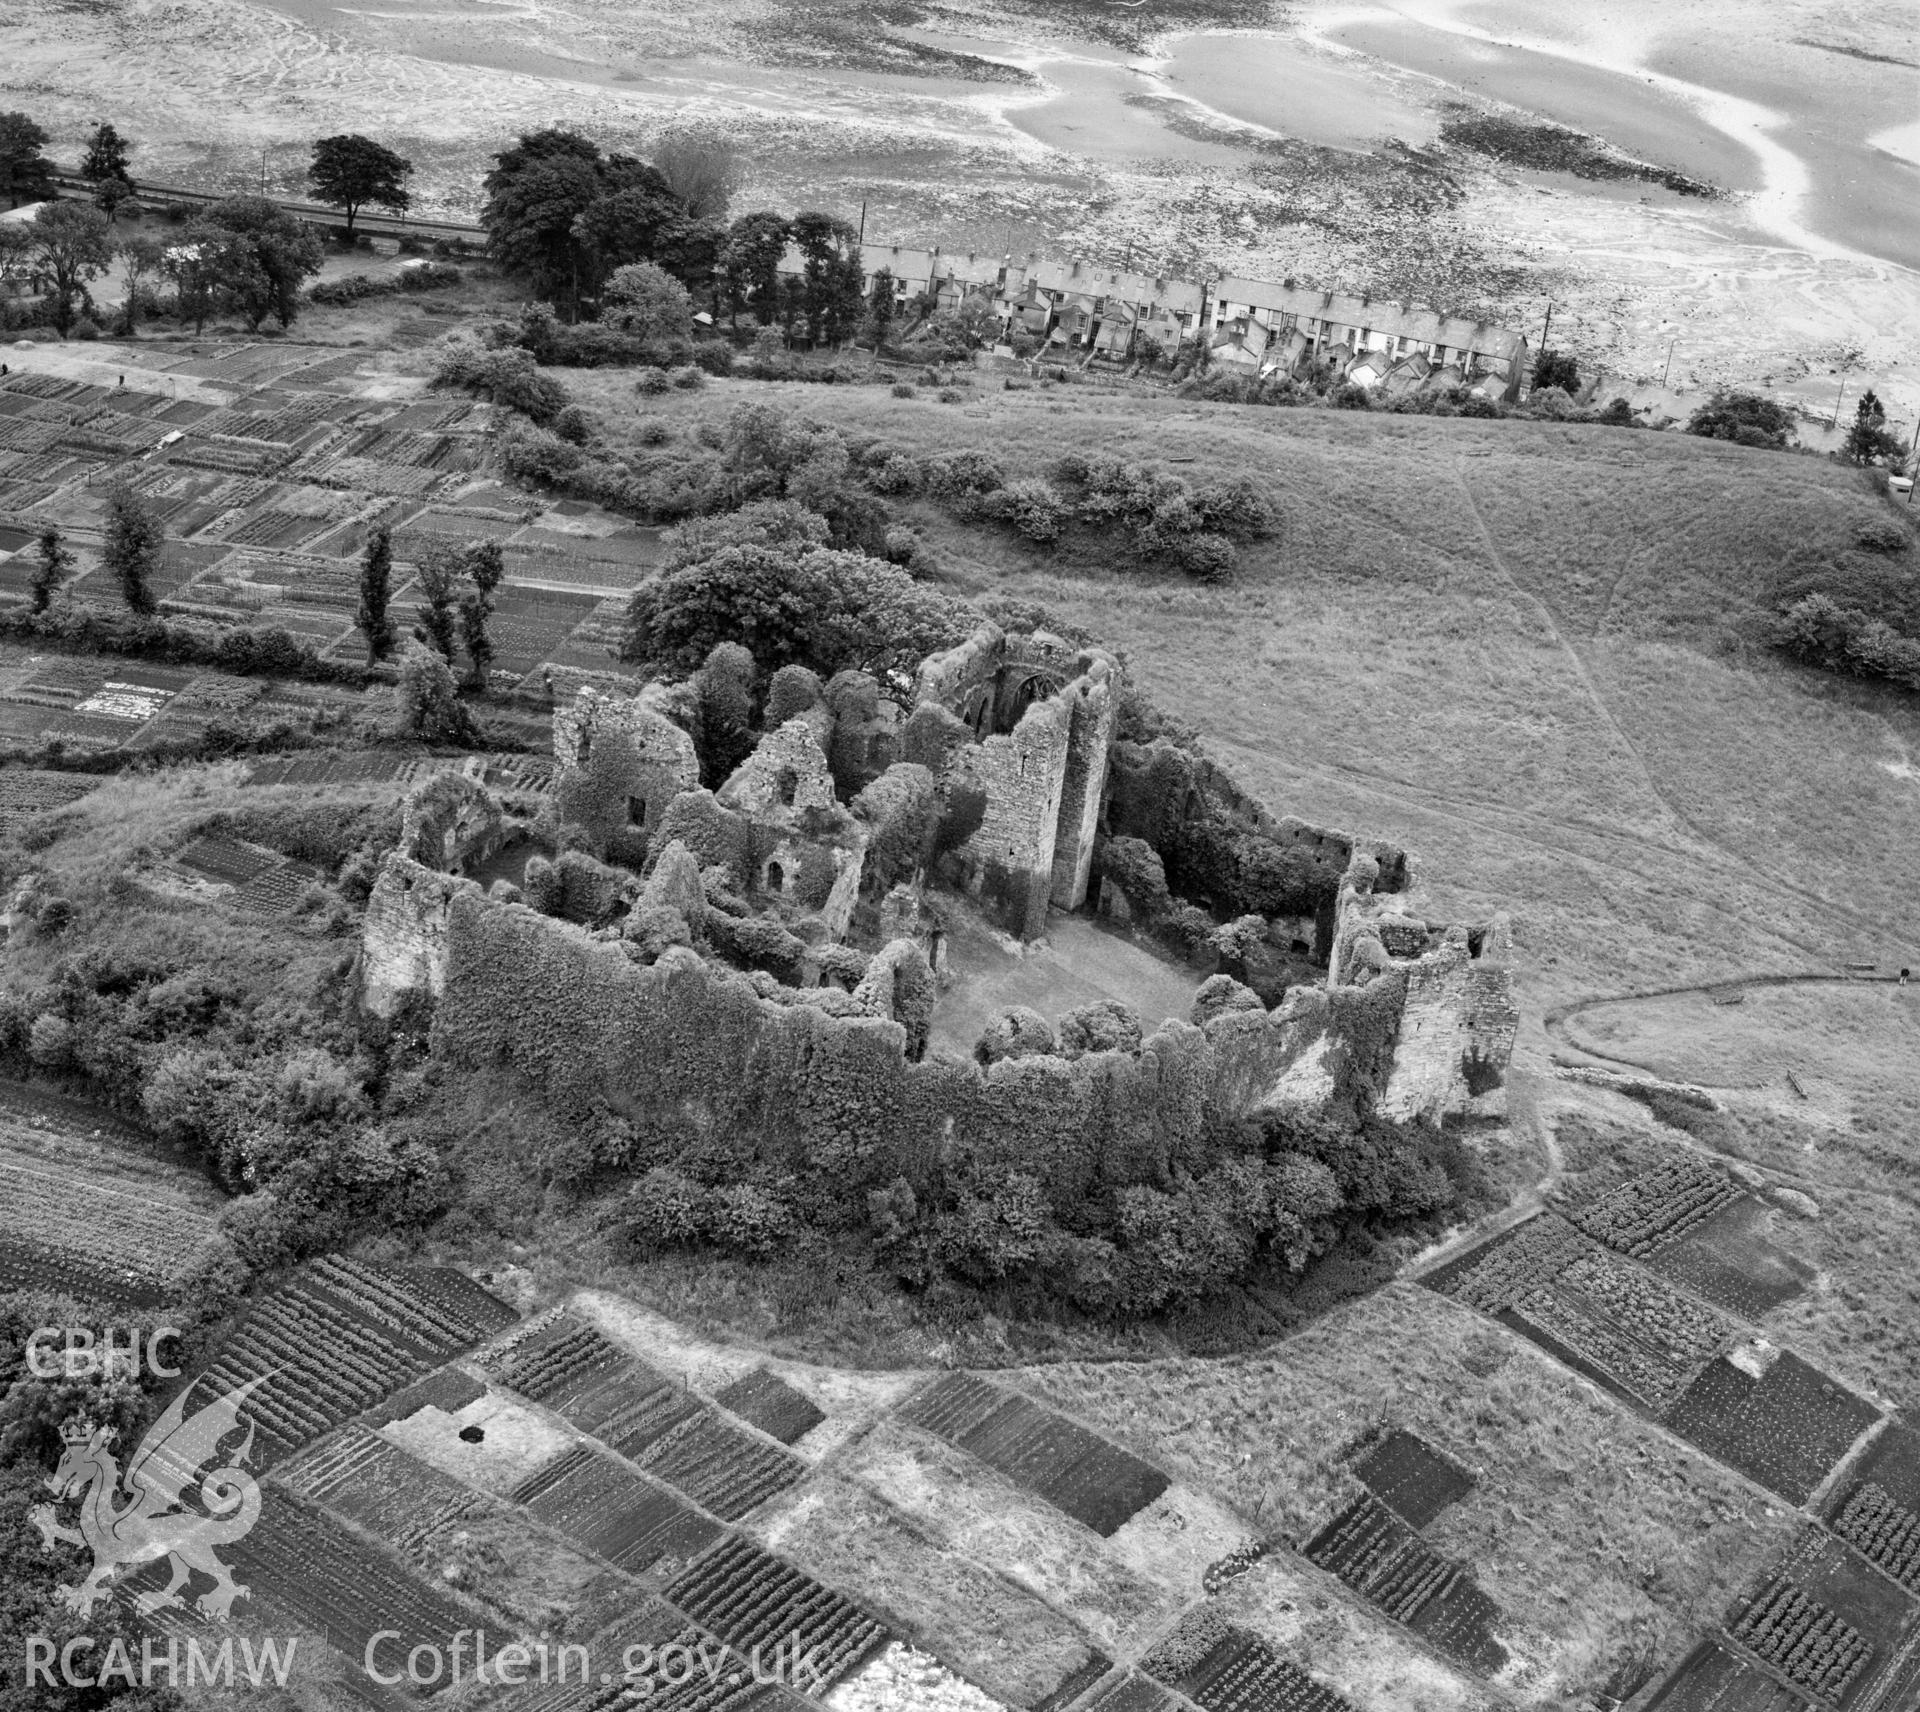 Digital copy of a black and white, oblique aerial photograph of Oystermouth Castle, Glamorgan. The photograph shows a view from the South West. The allotment gardens are still in use and the castle has benefitted from the removal of much of the vegetation and repair and restoration of the stonework.